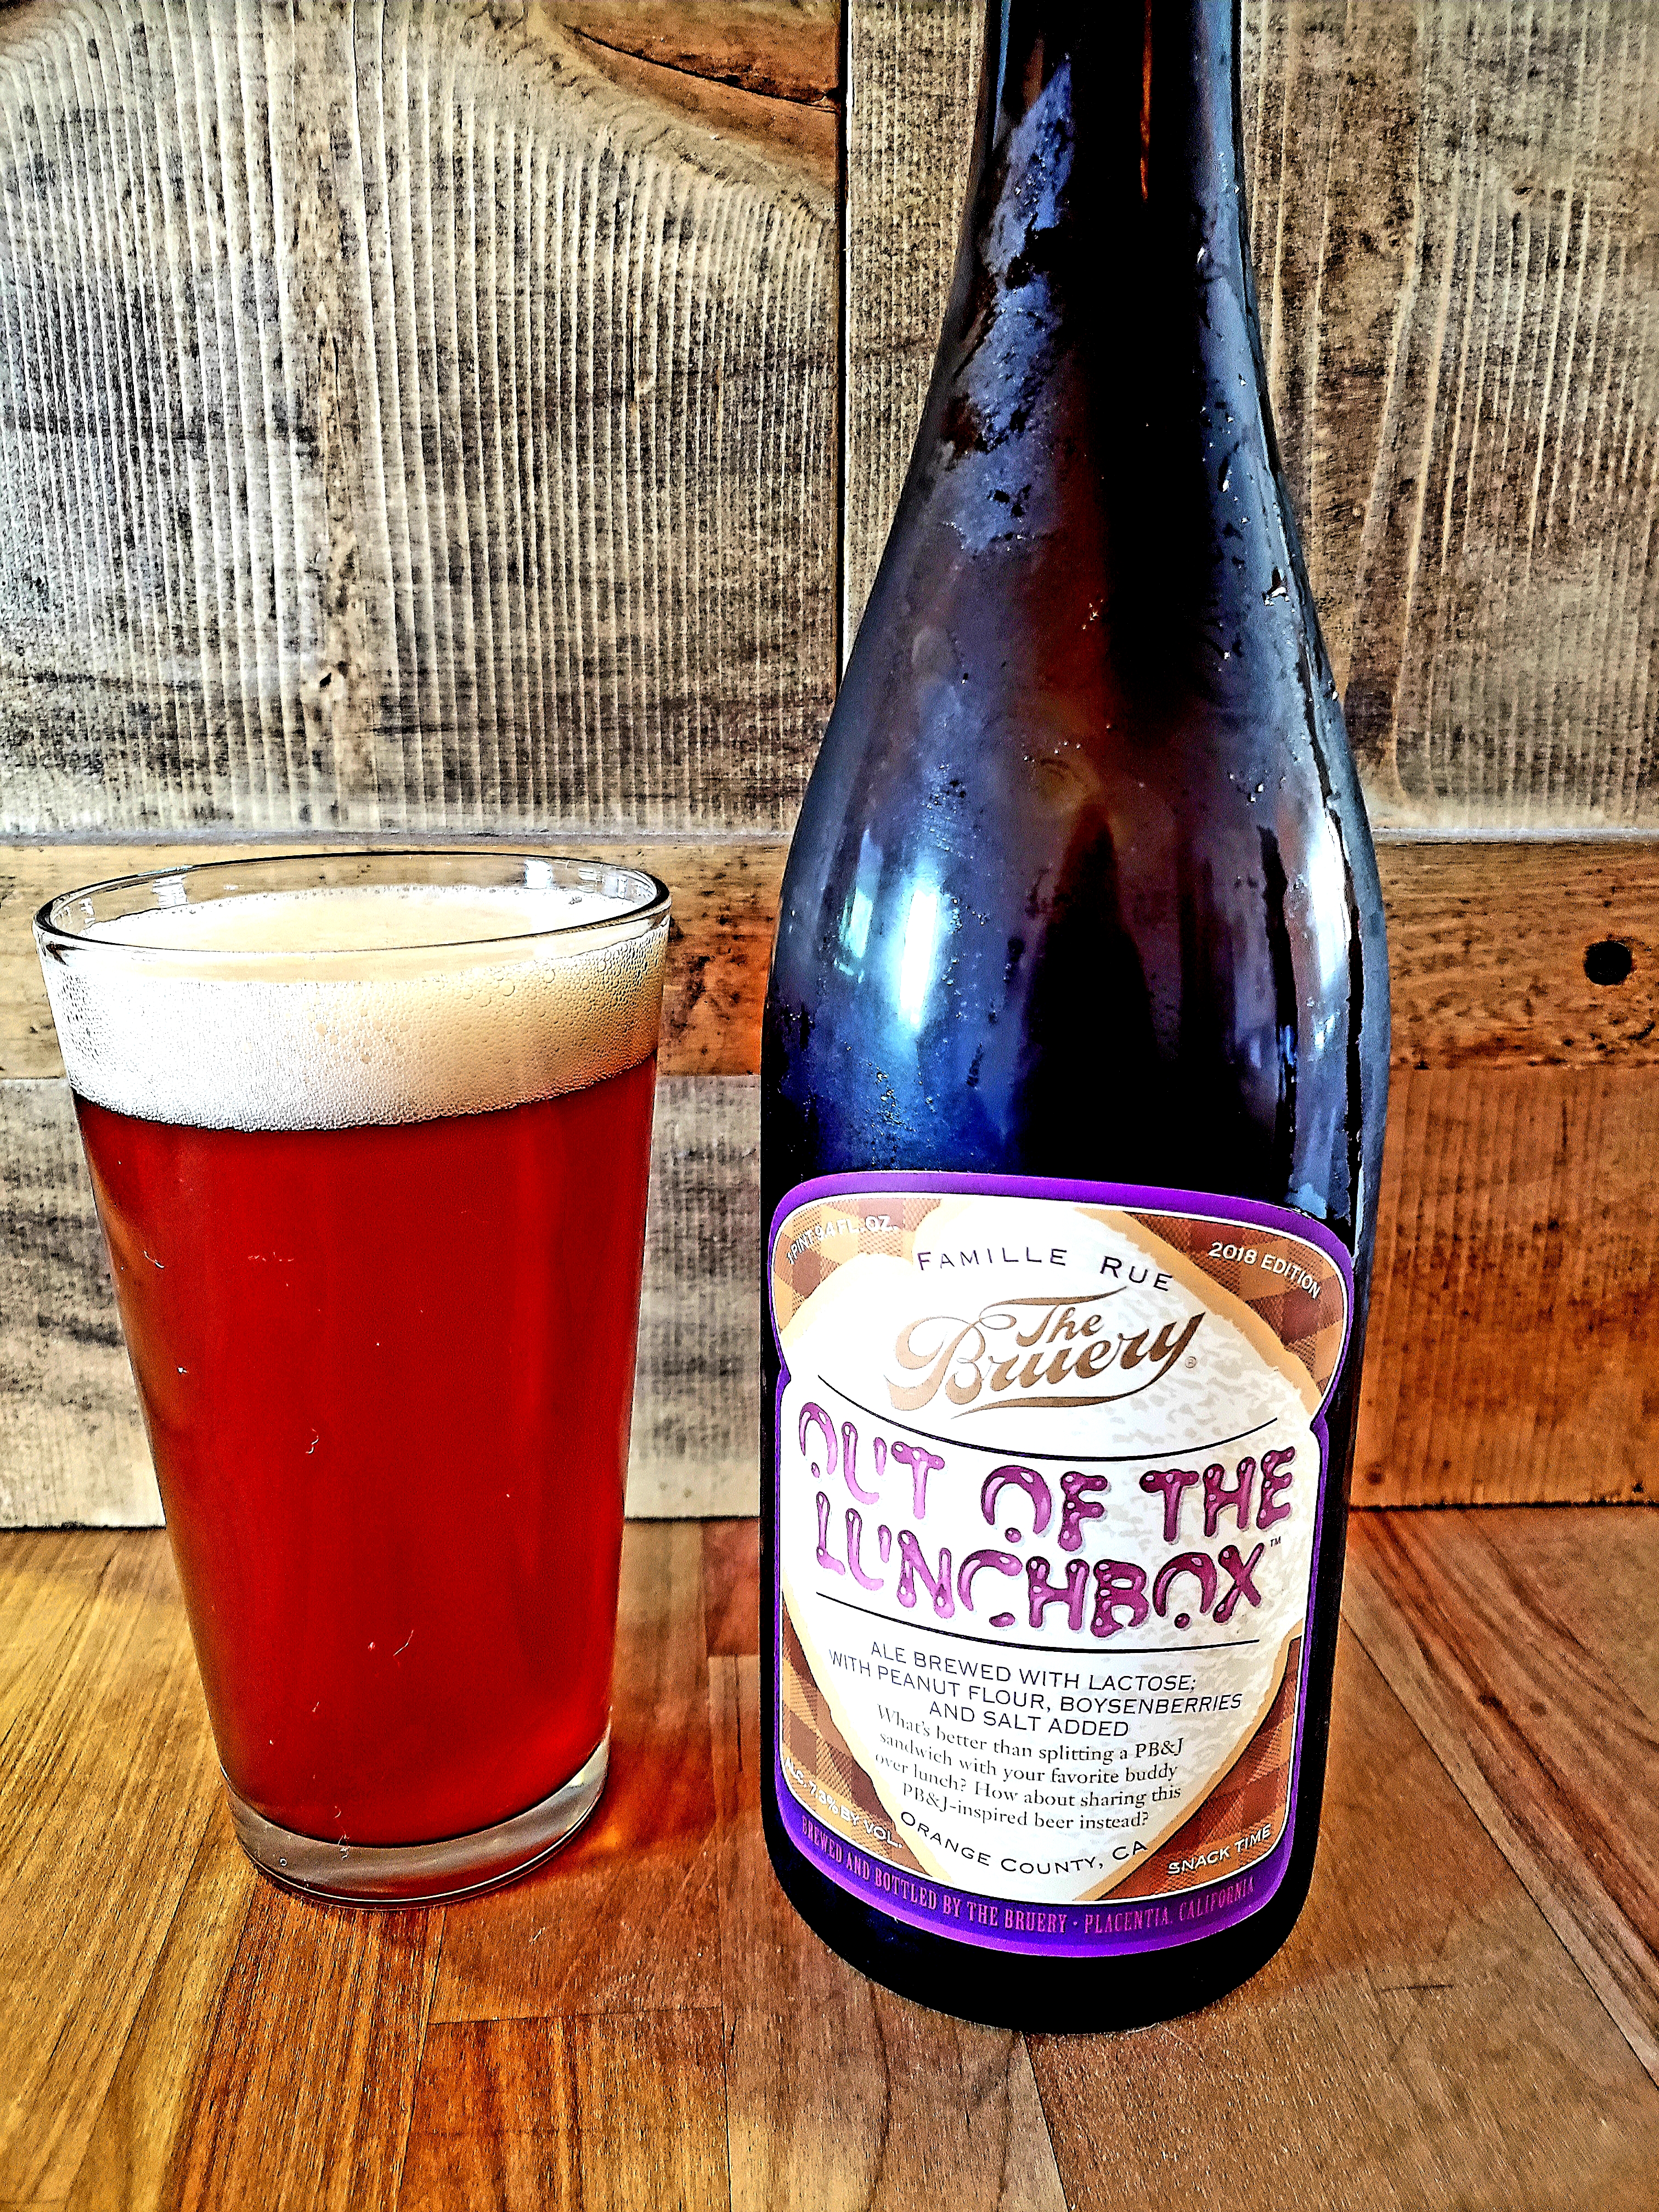 Out of the Lunchbox by the Bruery